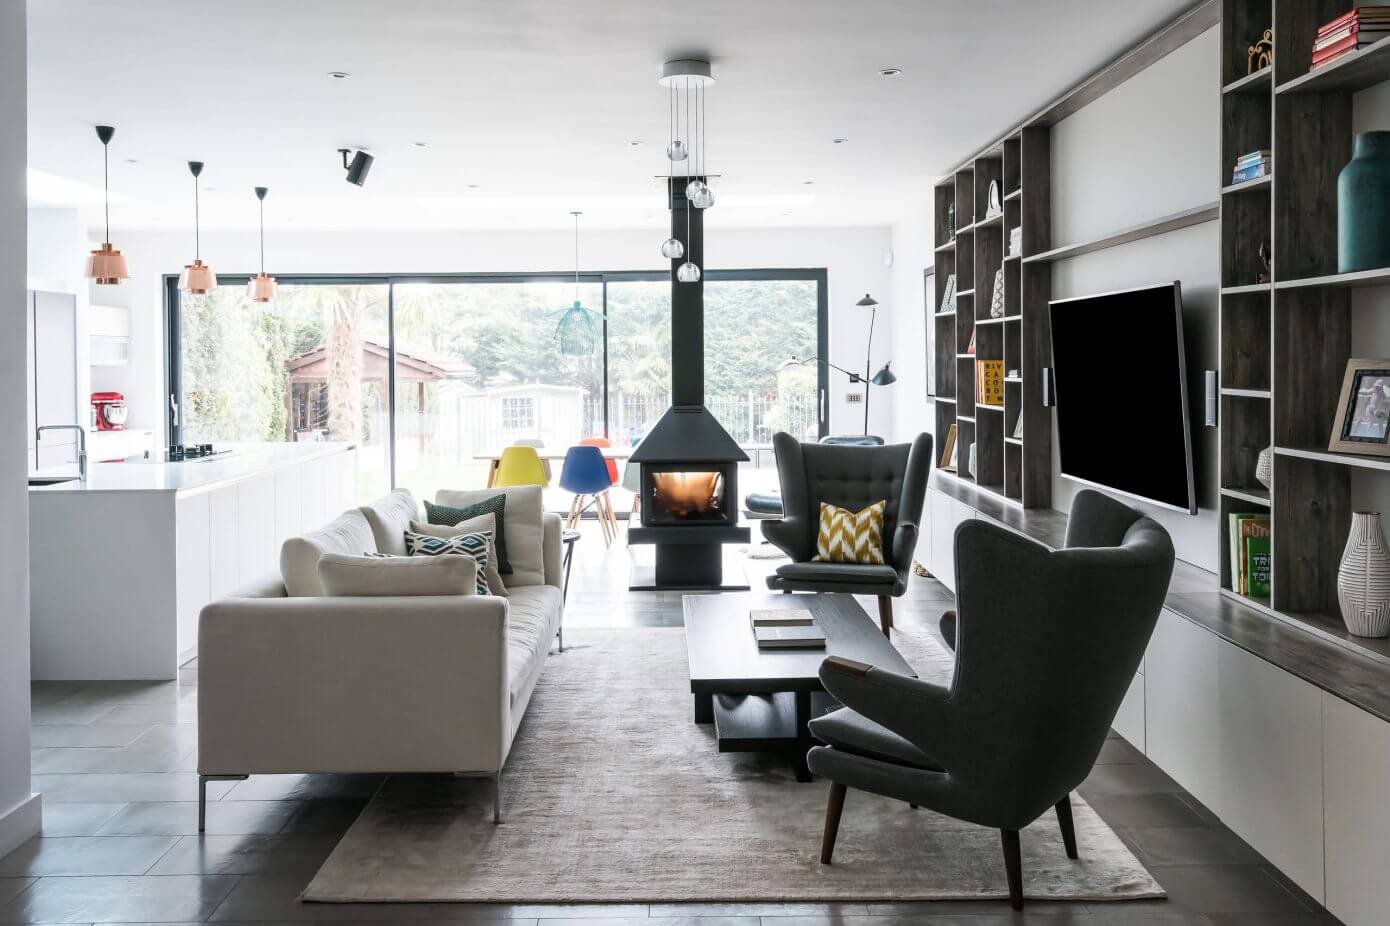 Home in Essex by Owl Design